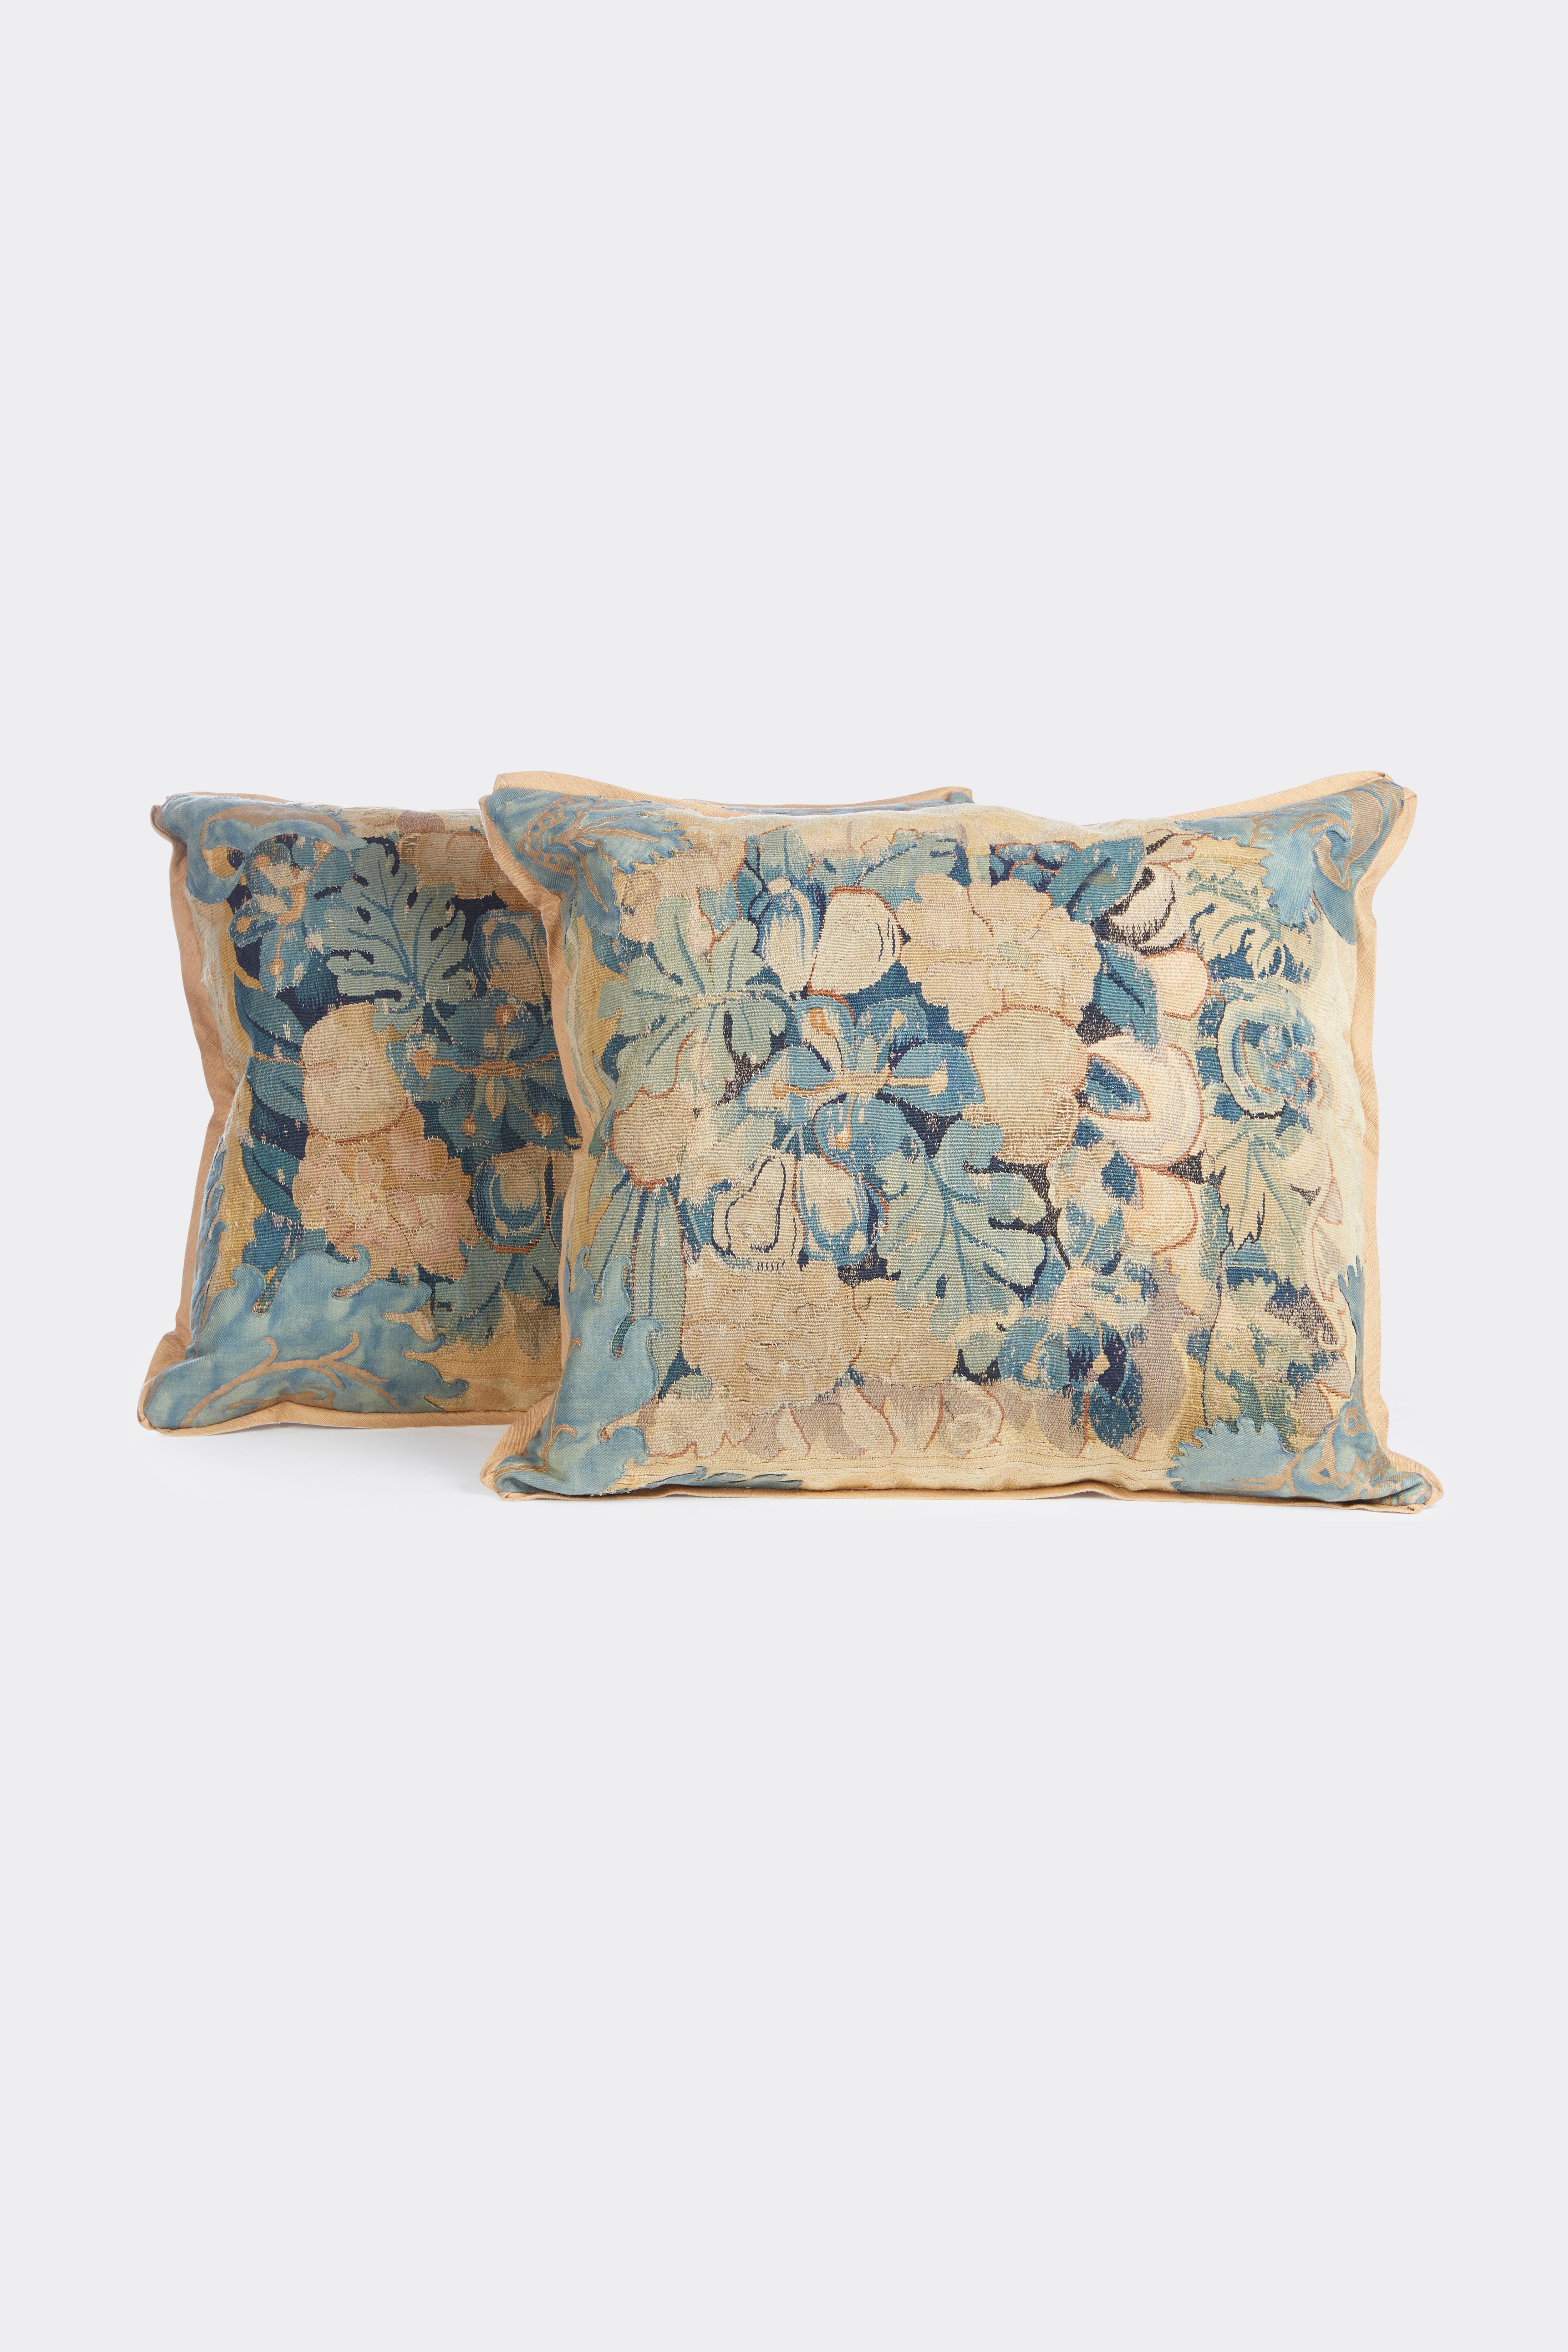 Contemporary Tapestry Fortuny Pillows by David Duncan